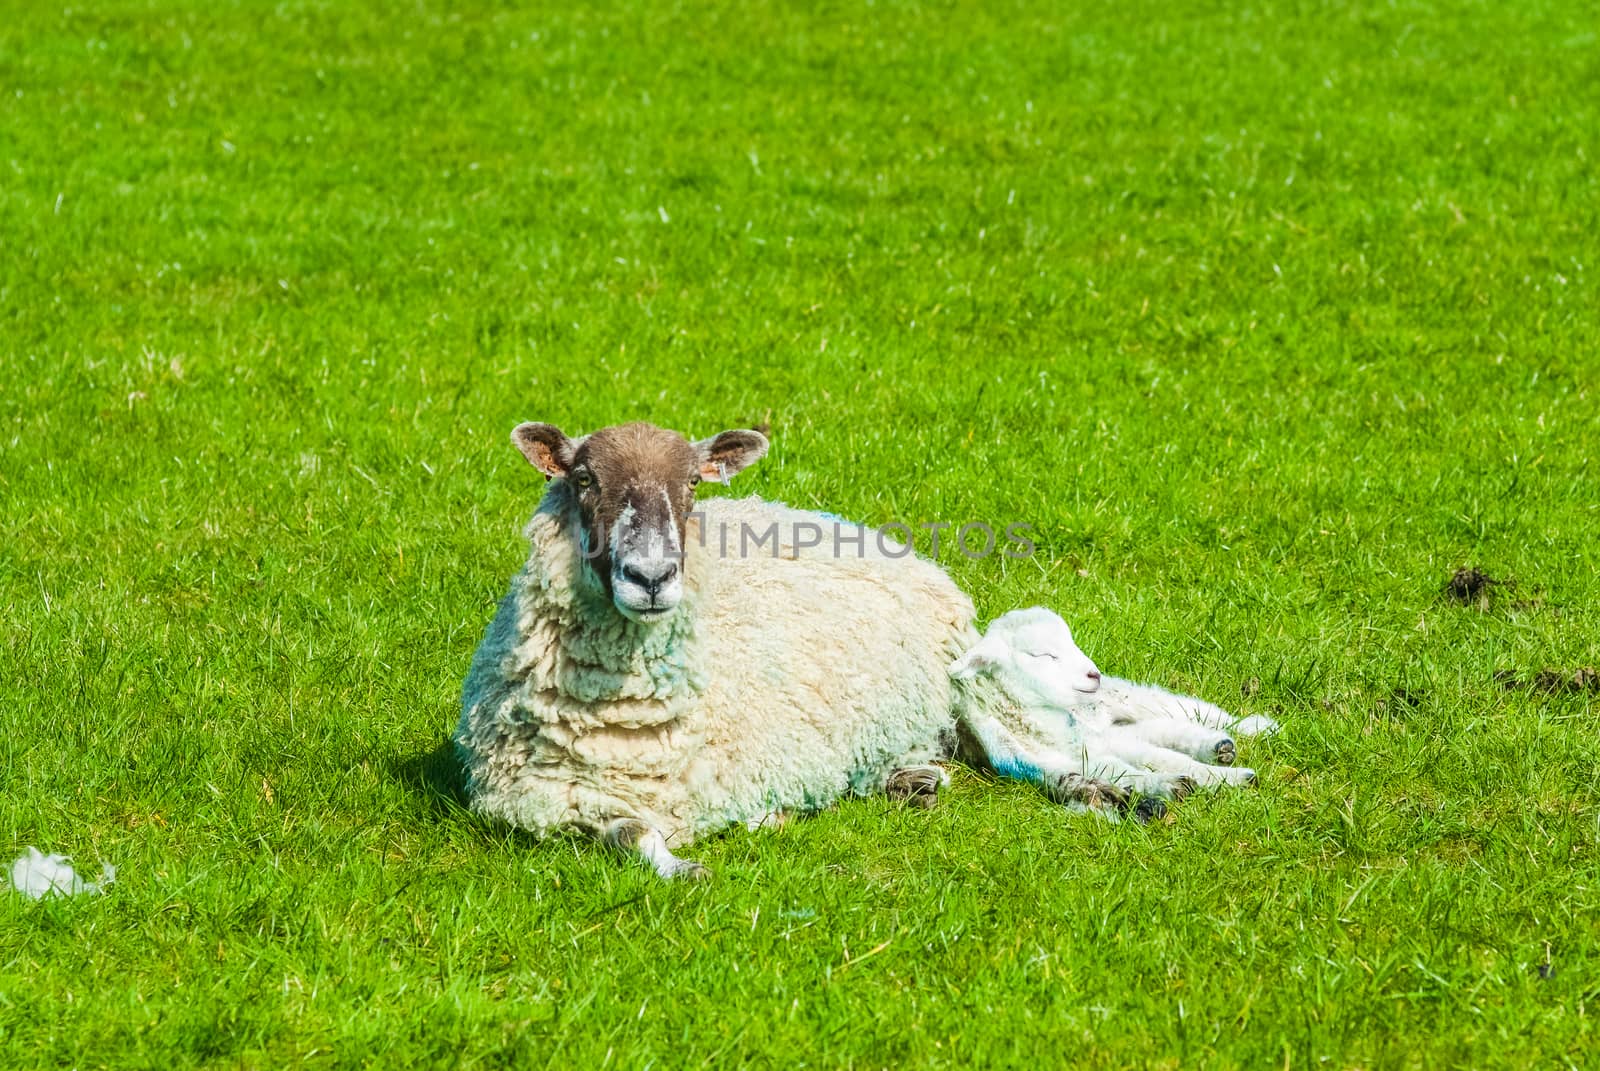 sheep and its lamb in a field in Springtime